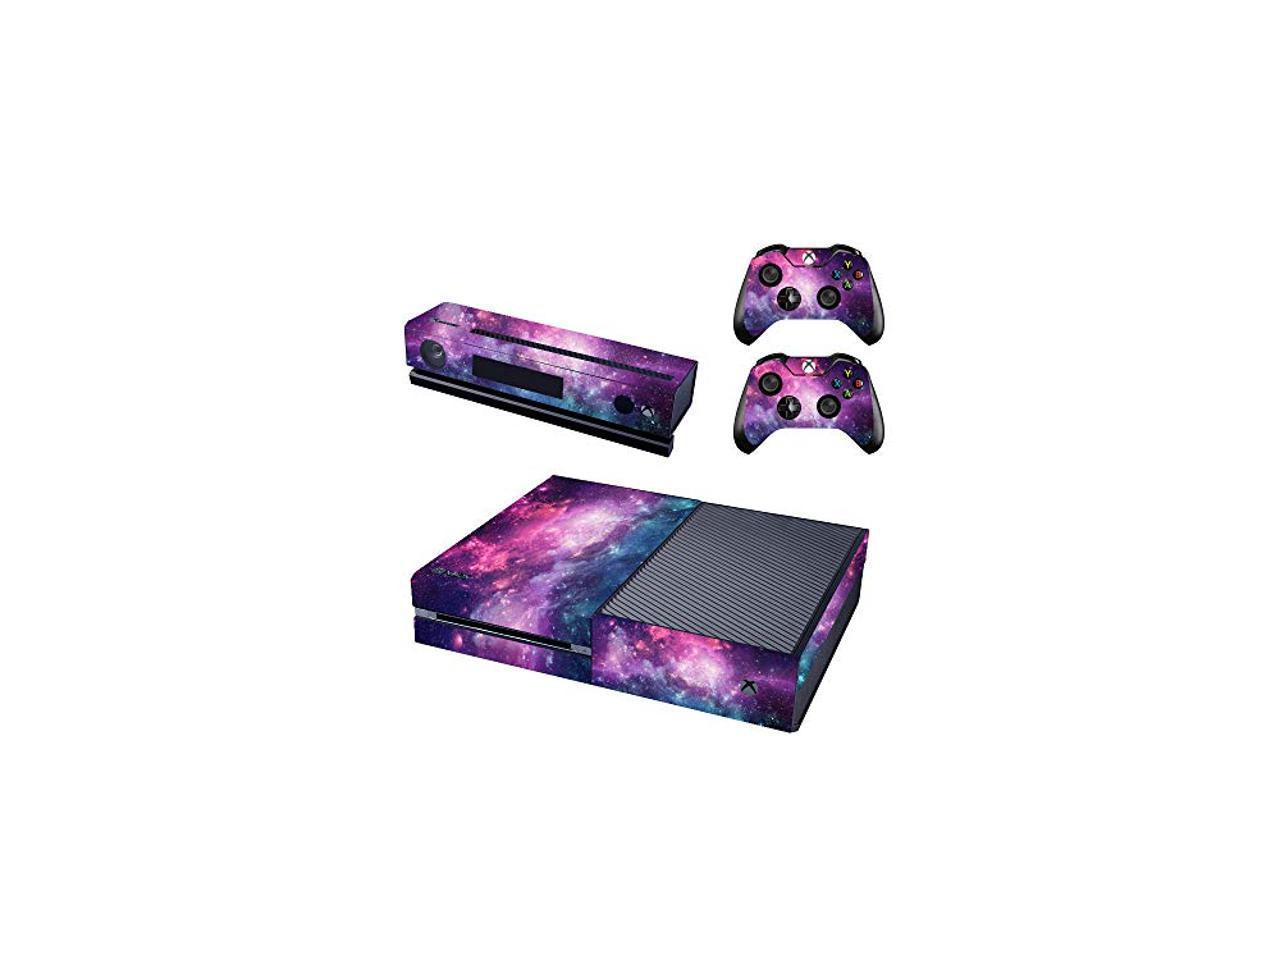 FOTTCZ Xbox One Skin Whole Body Vinyl Sticker Decal Cover for Microsoft Xbox One Console and Two Controller Nebular 